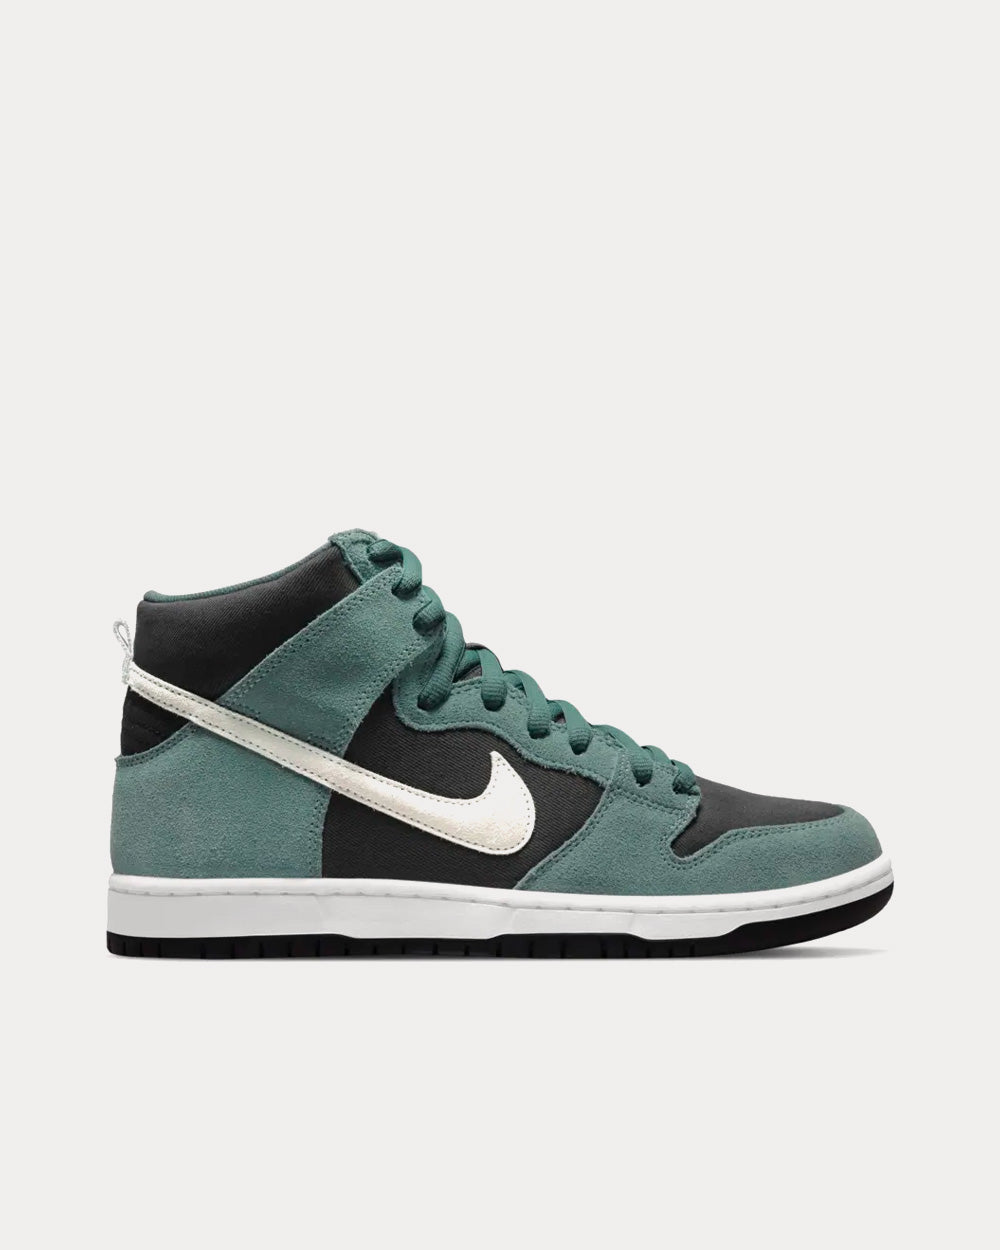 SB Dunk High Pro Mineral Slate Suede High Top Sneakers